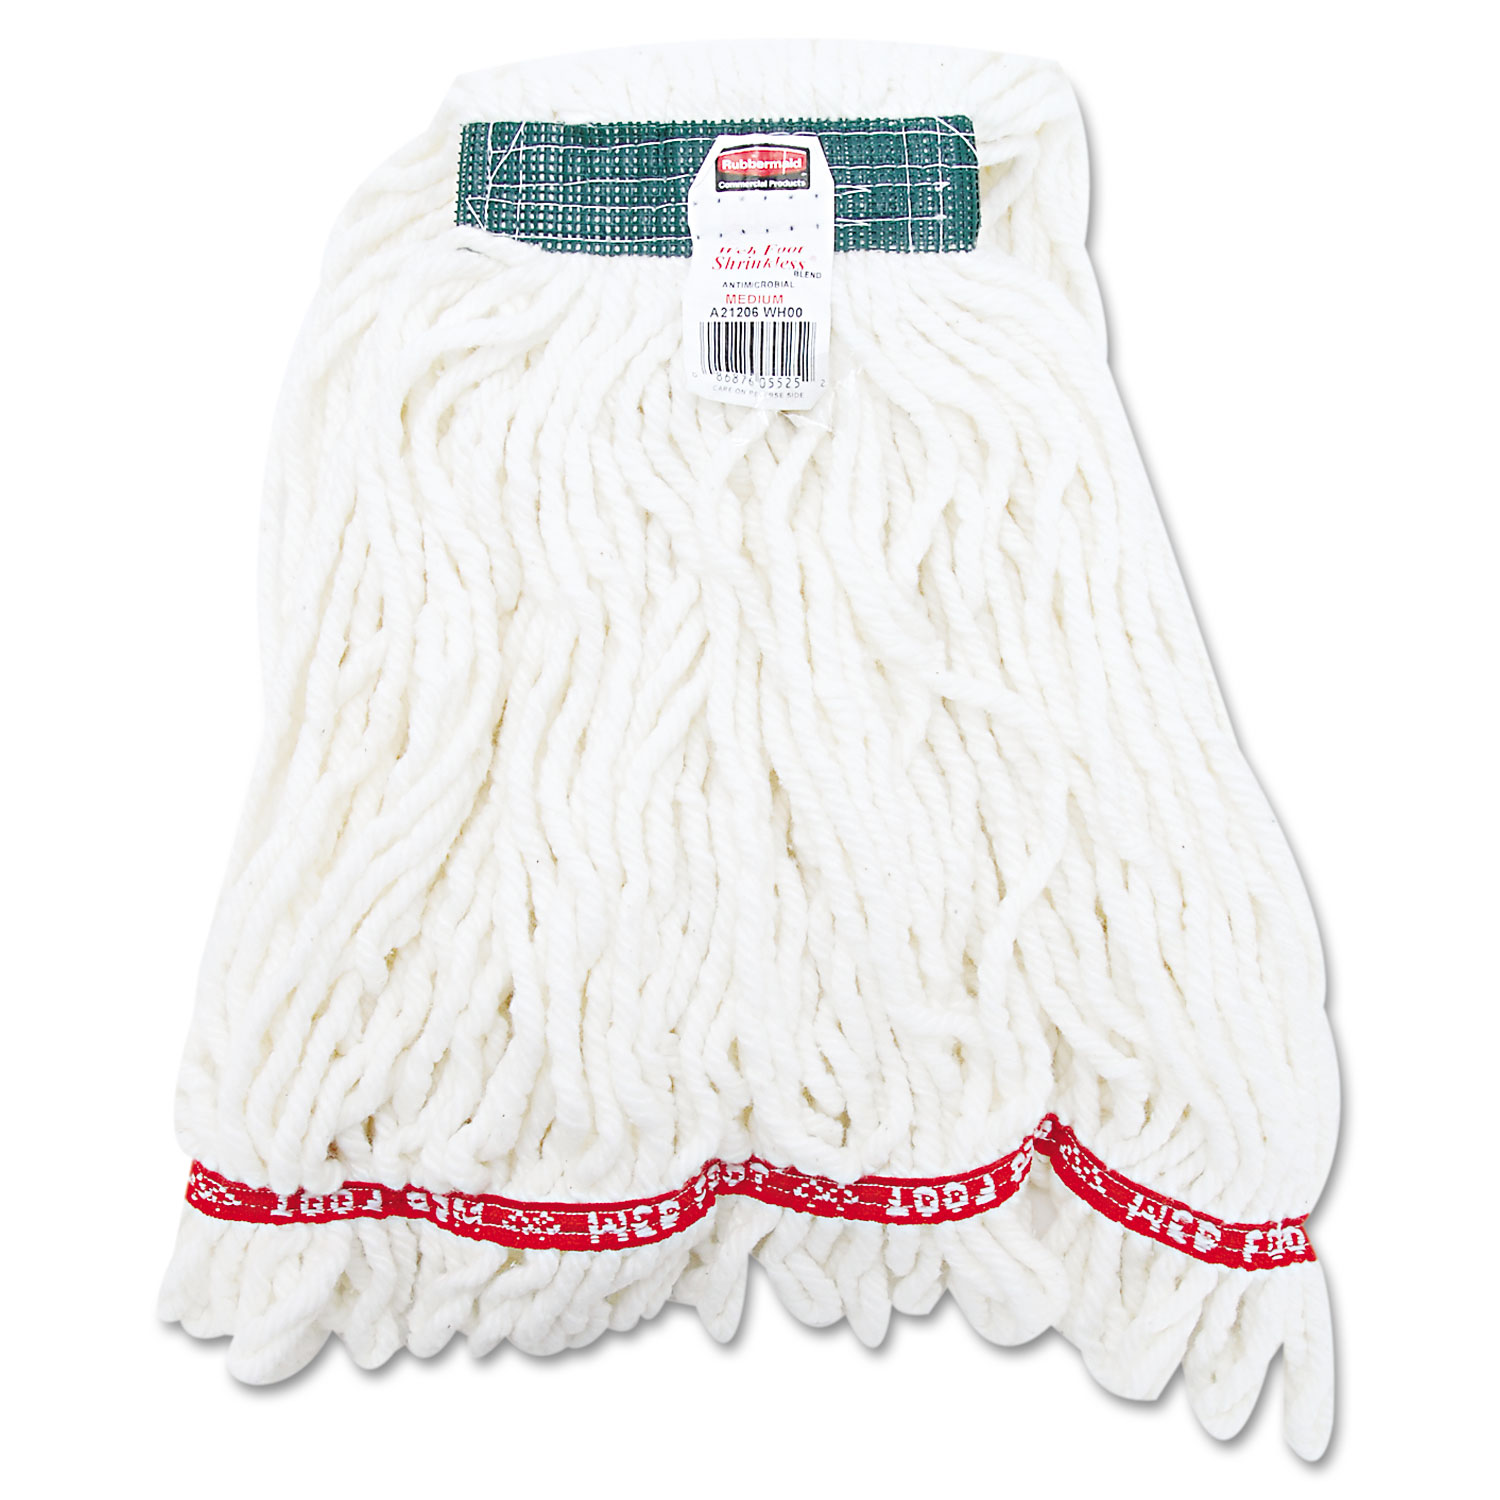  Rubbermaid Commercial FGA21206WH00 Web Foot Shrinkless Looped-End Wet Mop Head, Cotton/Synthetic, Medium, White (RCPA21206WHICT) 